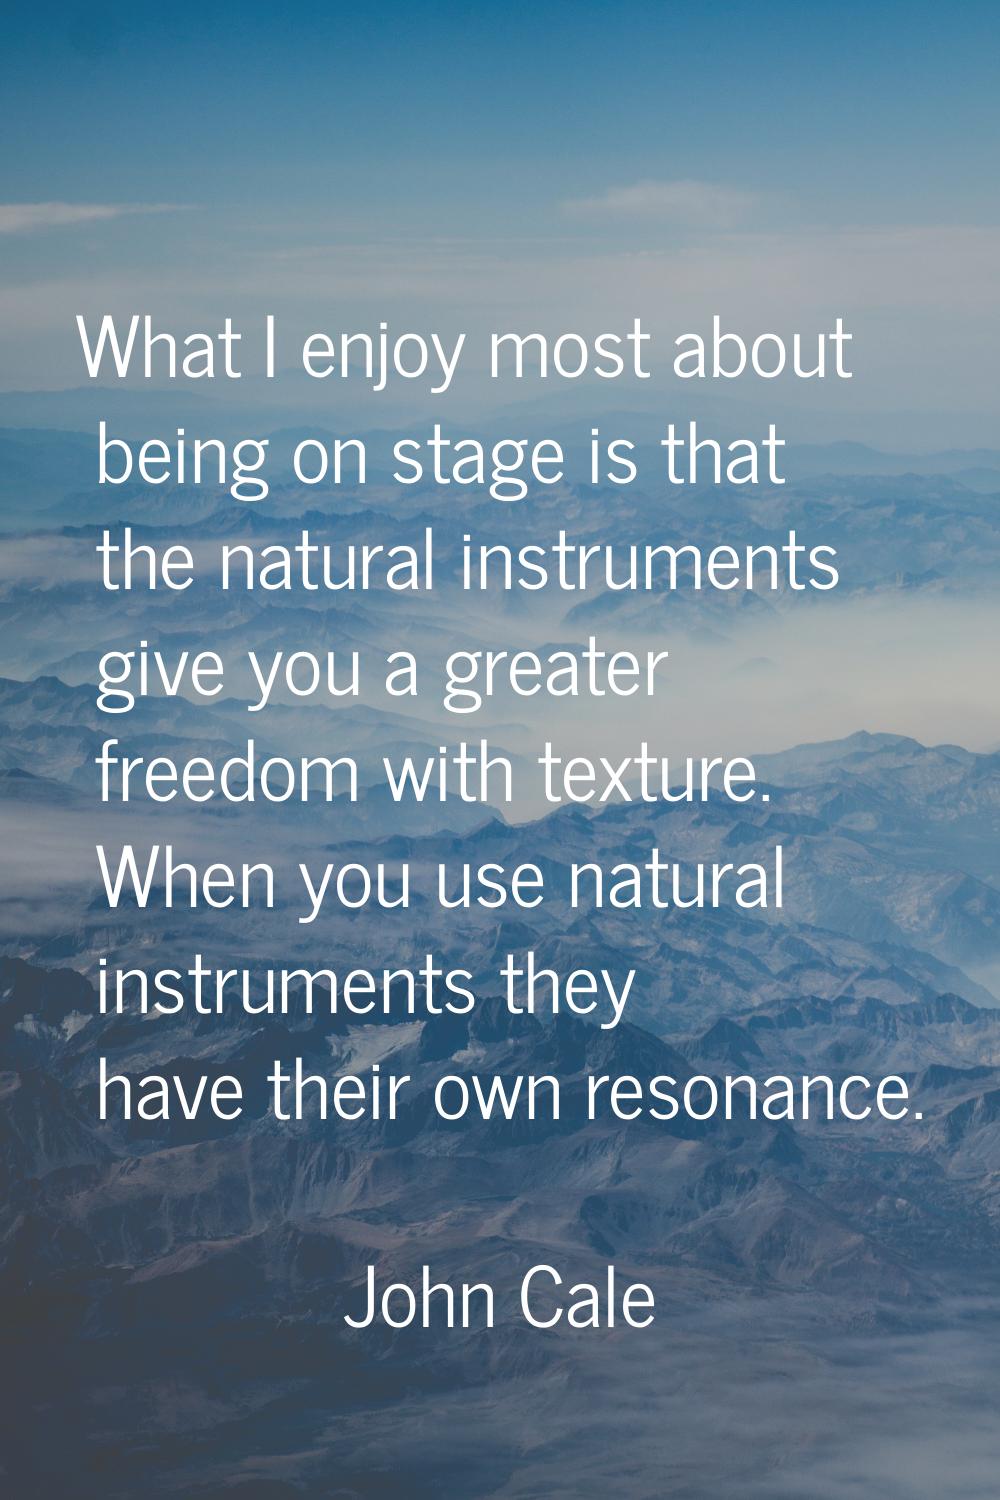 What I enjoy most about being on stage is that the natural instruments give you a greater freedom w